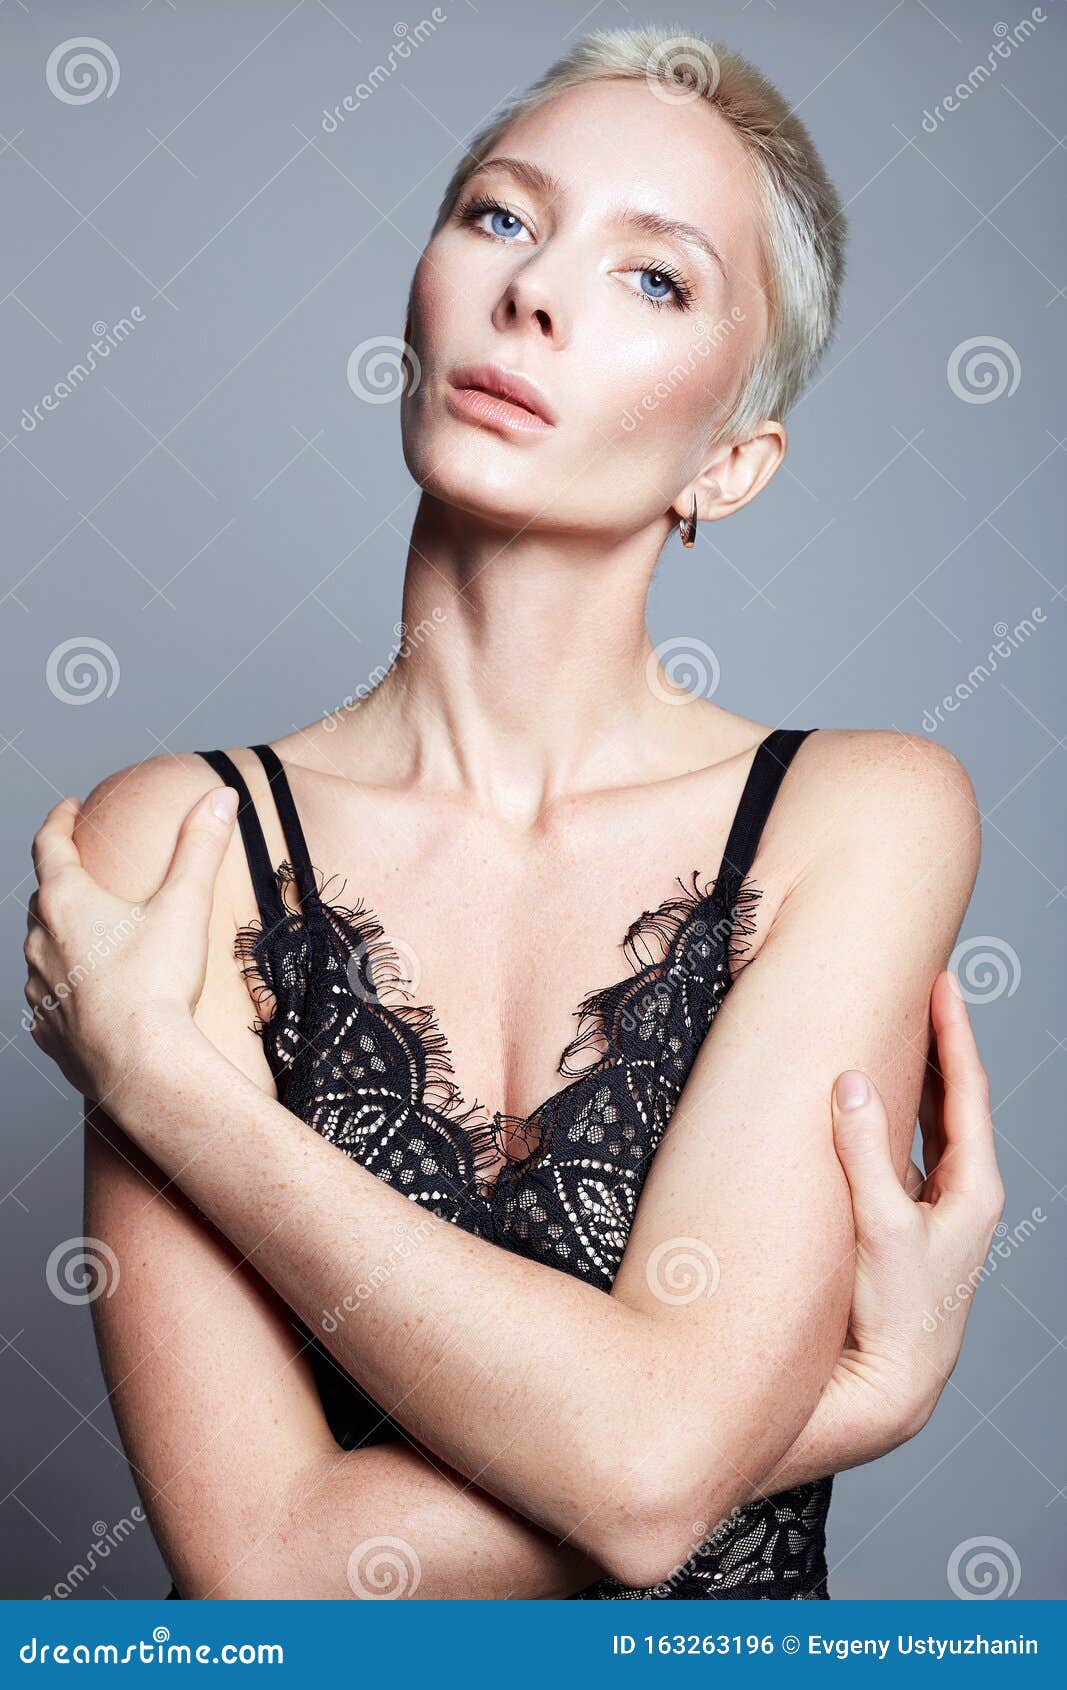 Short Hair Aged Model Woman in Underwear Stock Photo - Image of